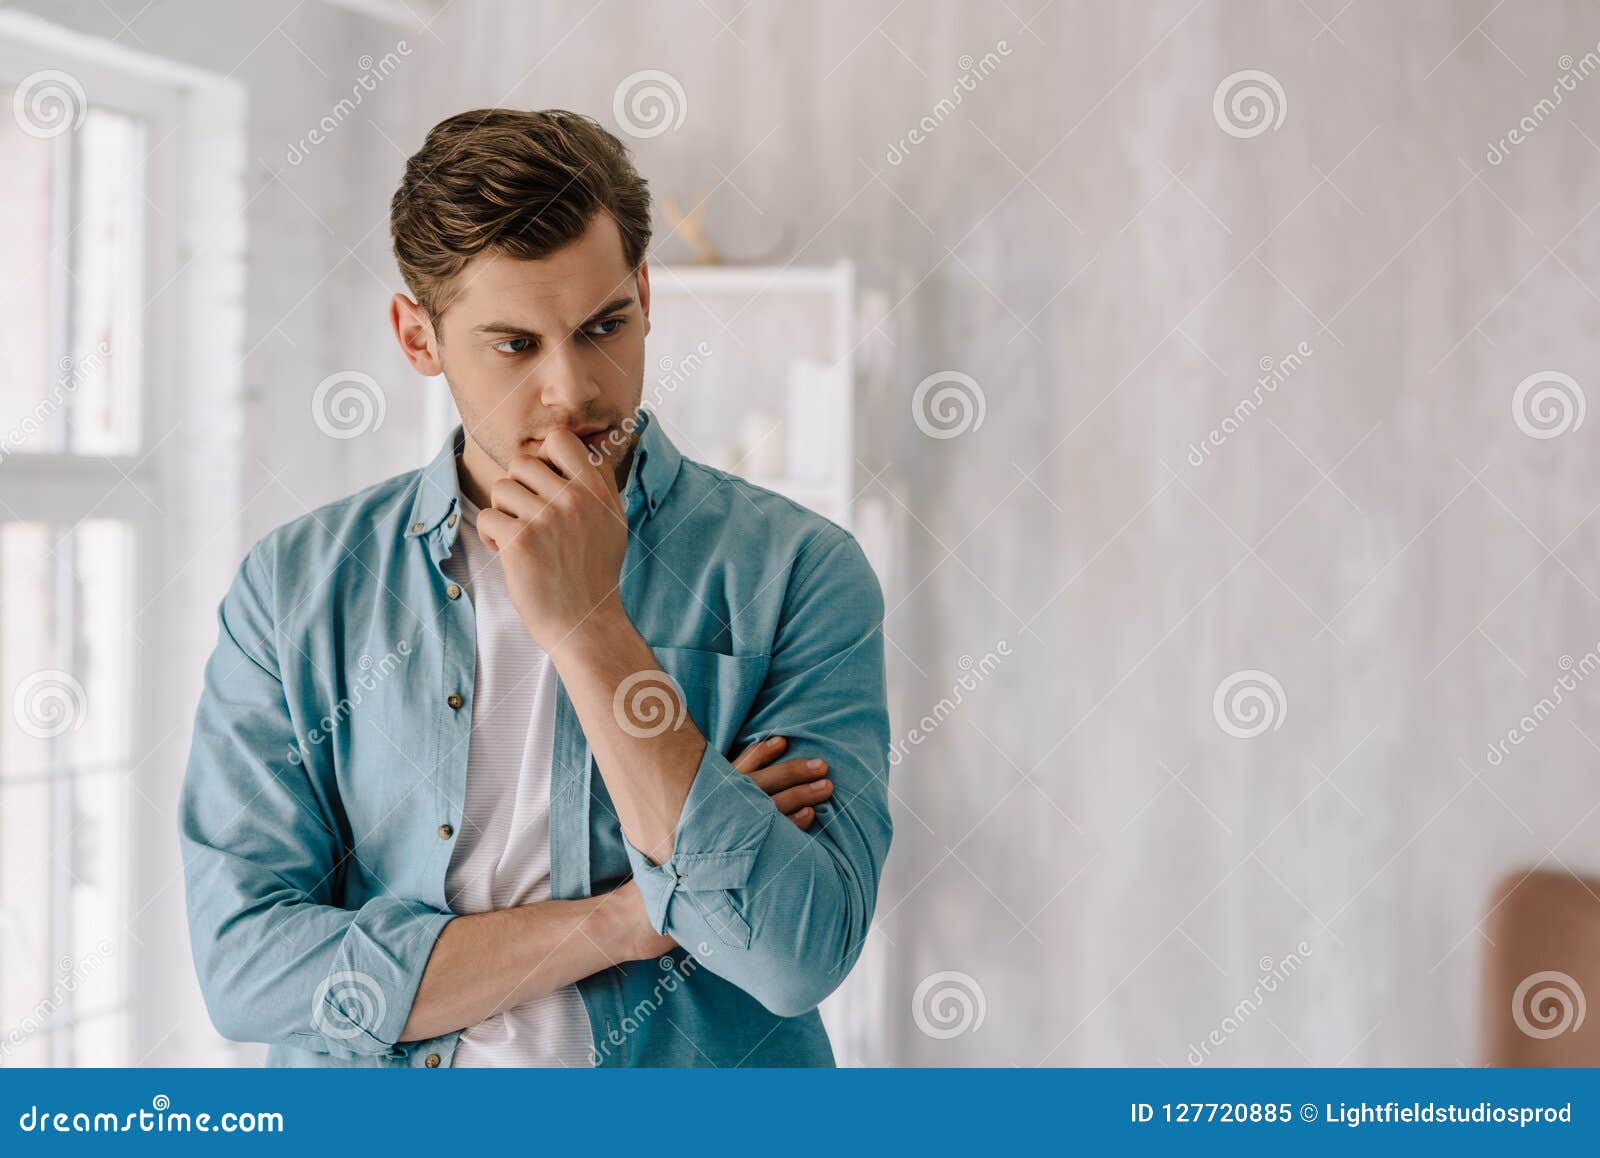 thoughtful young man wearing lounge wear clothes